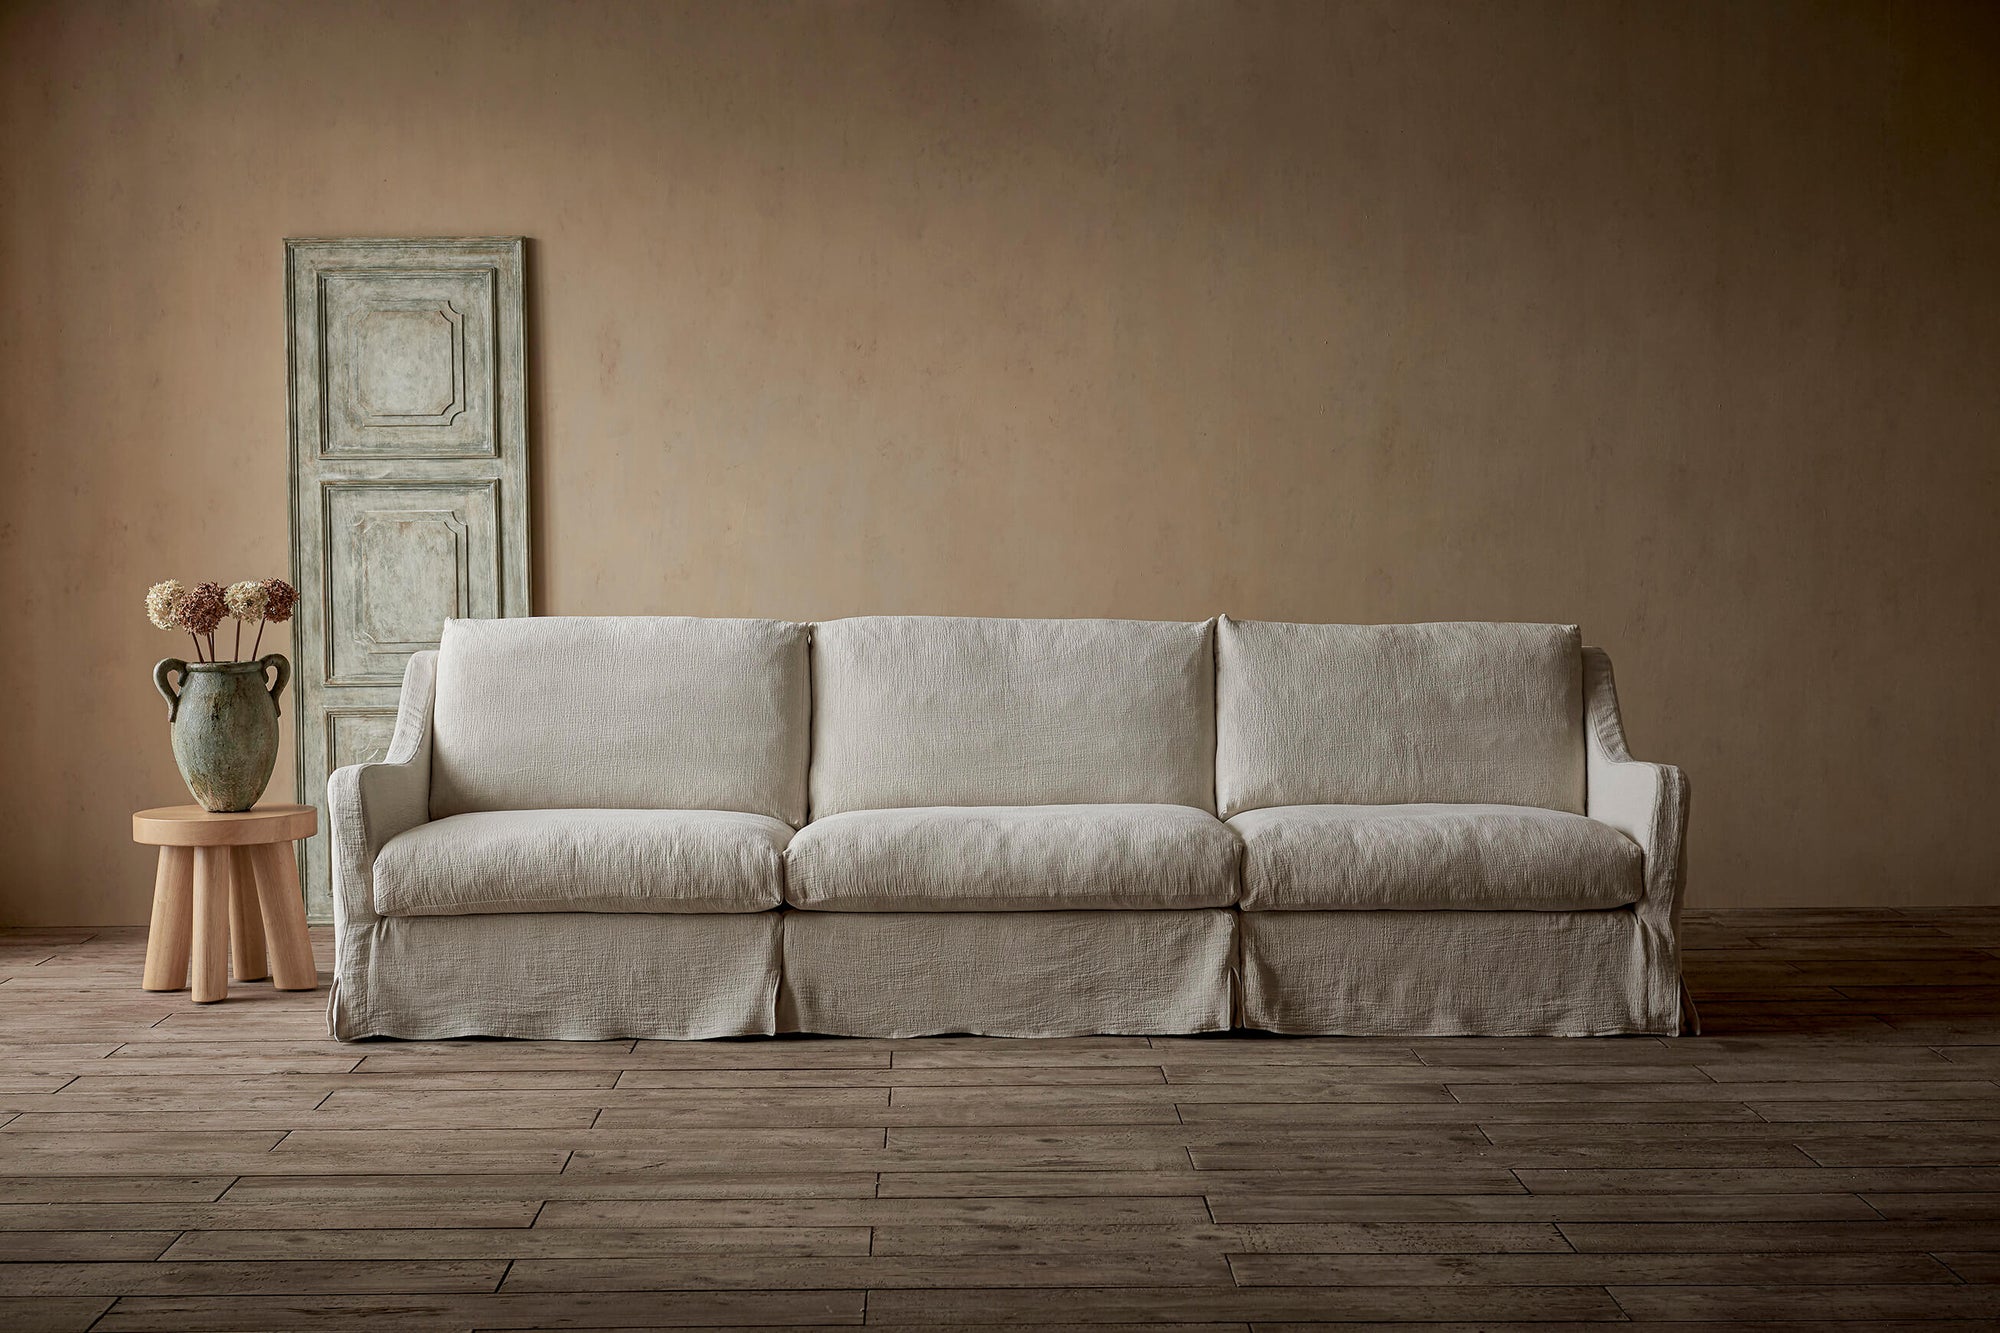 Esmé Sectional Sofa in Corn Silk, a light beige Washed Cotton Linen, placed in a room with a vase of flowers on a stool